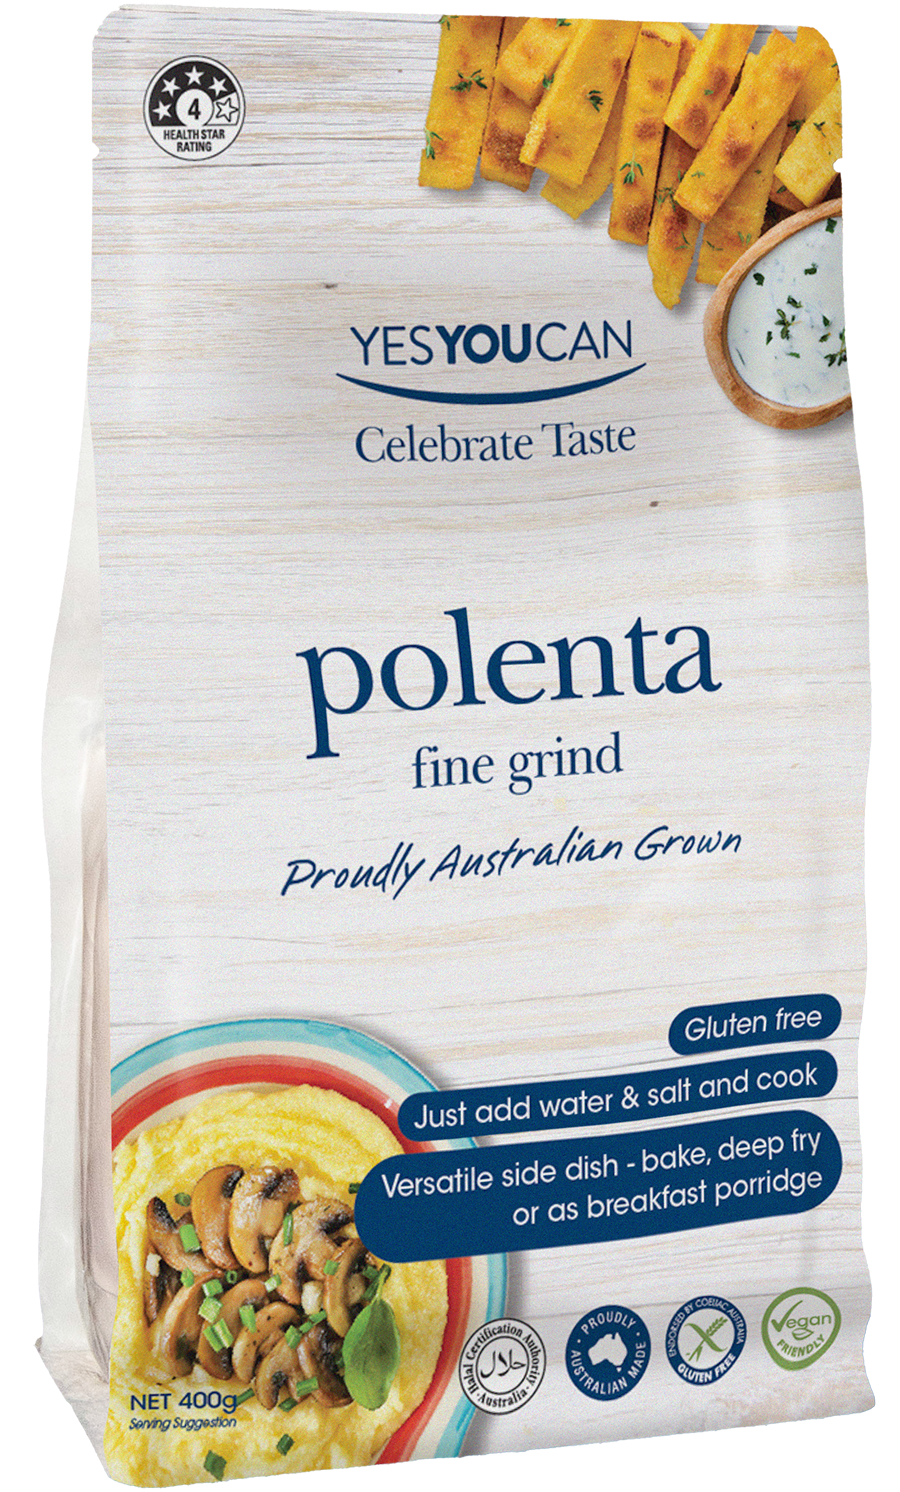 Savoury Snack and Polenta Pack